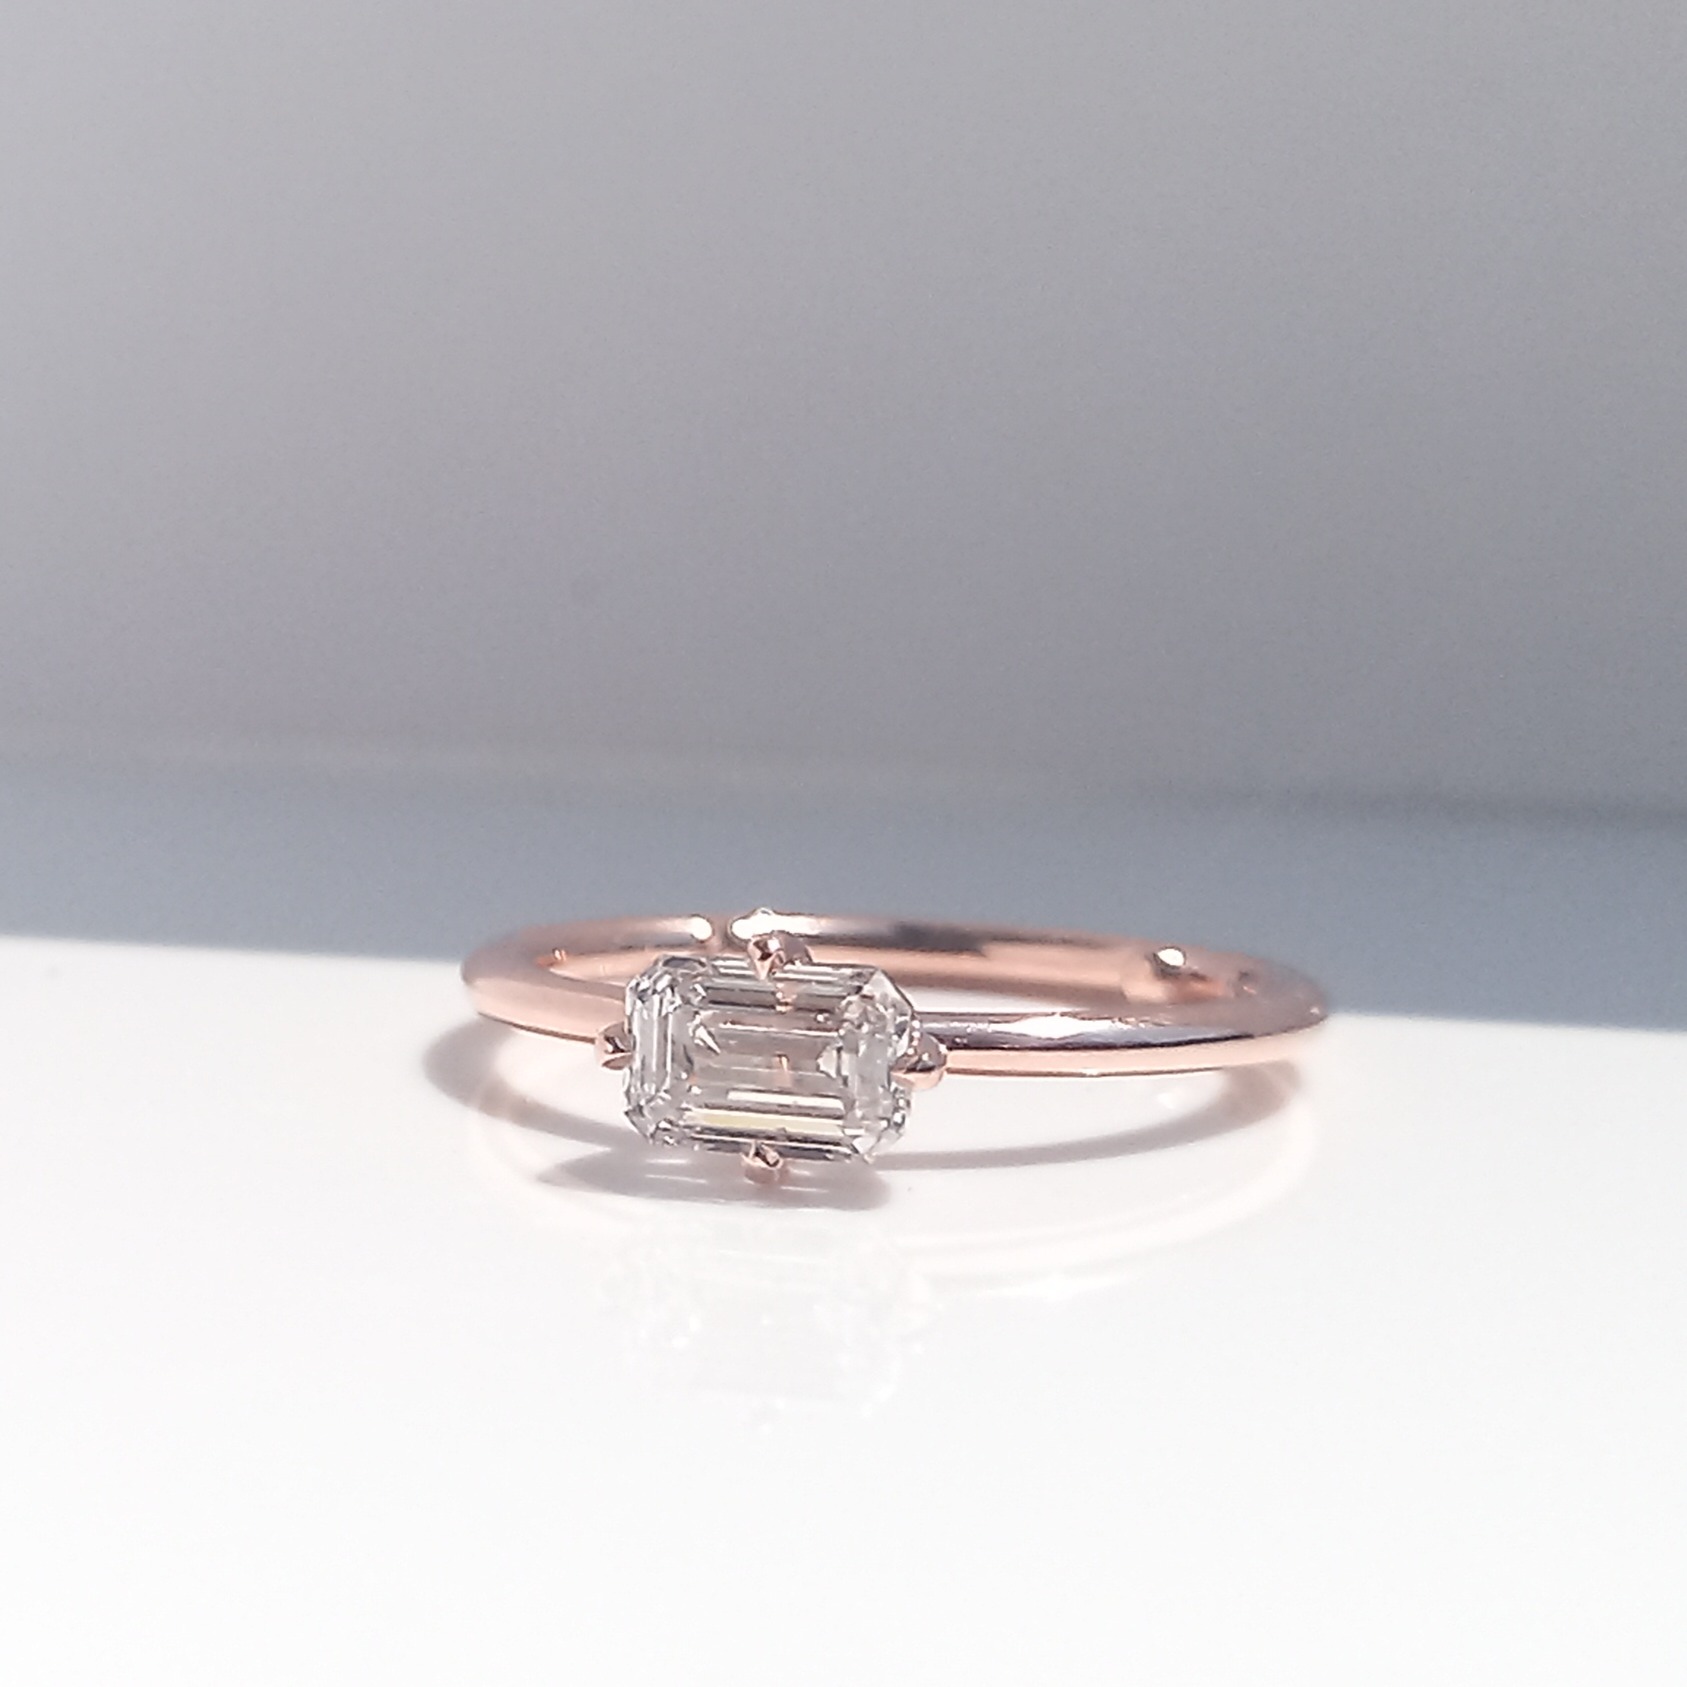 East West Emerald Cut Compass Solitaire Diamond Ring, diamond ring, diamond engagement ring, engagement ring, emerald diamond, danielle camera jewellery